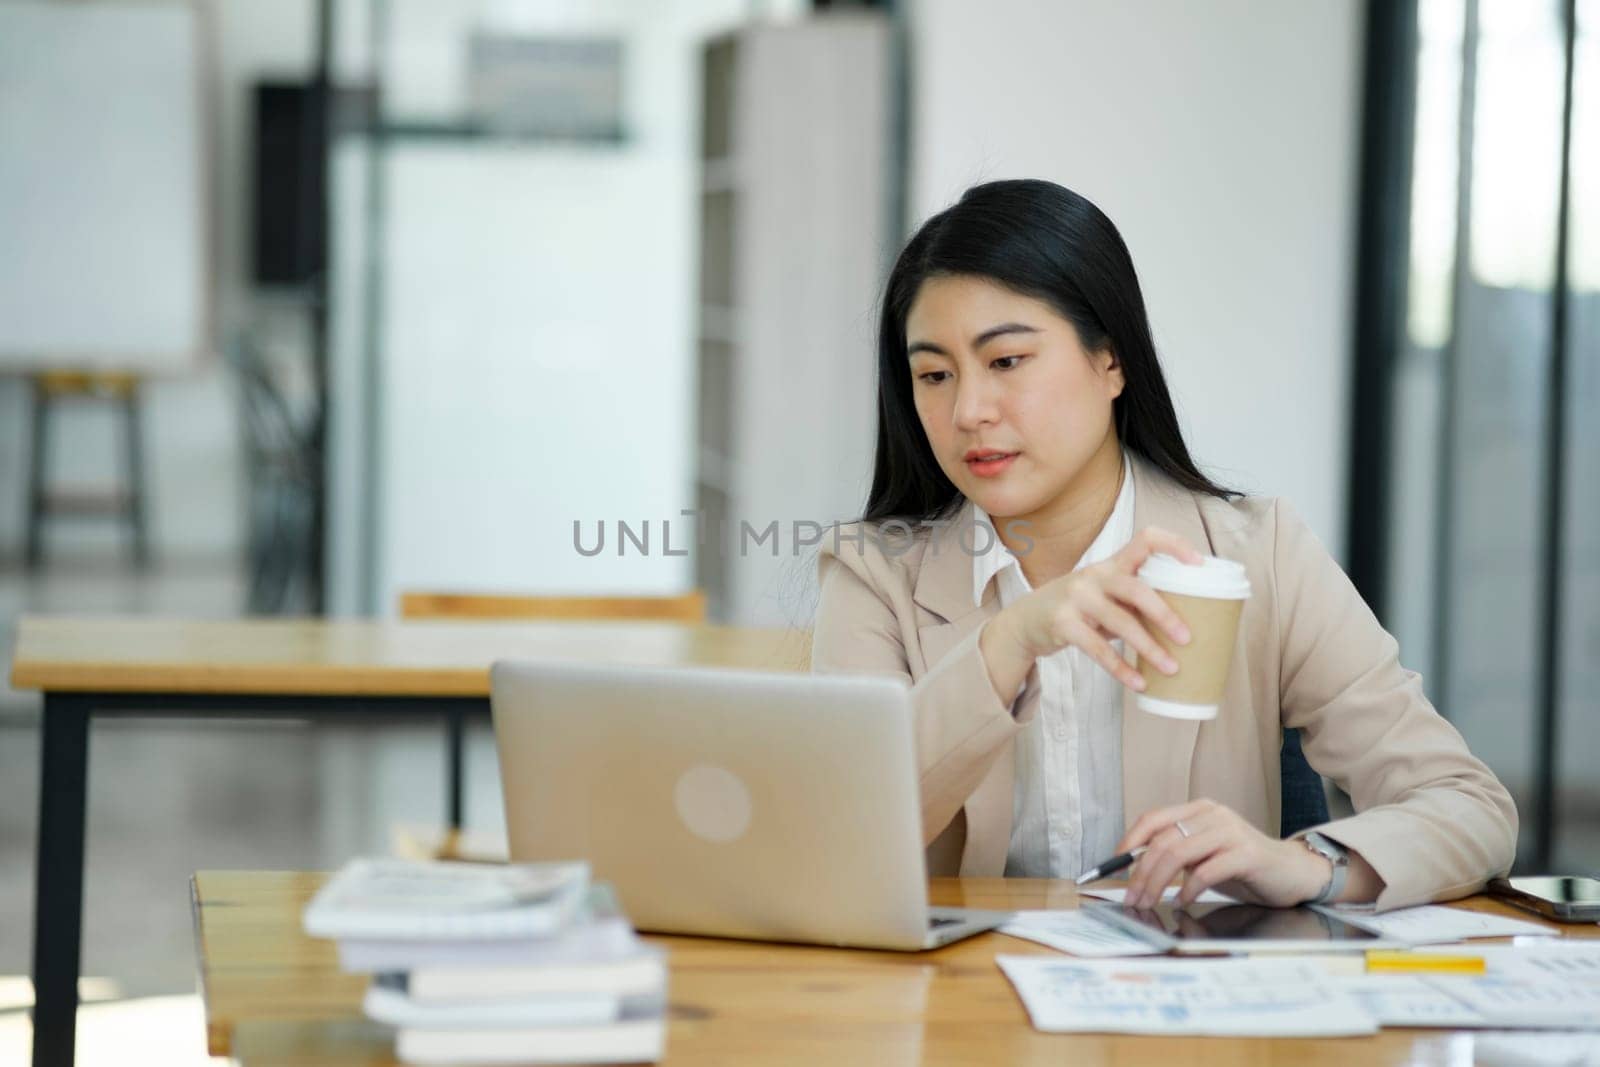 A focused businesswoman working on a laptop while holding a notebook in a bright office environment..